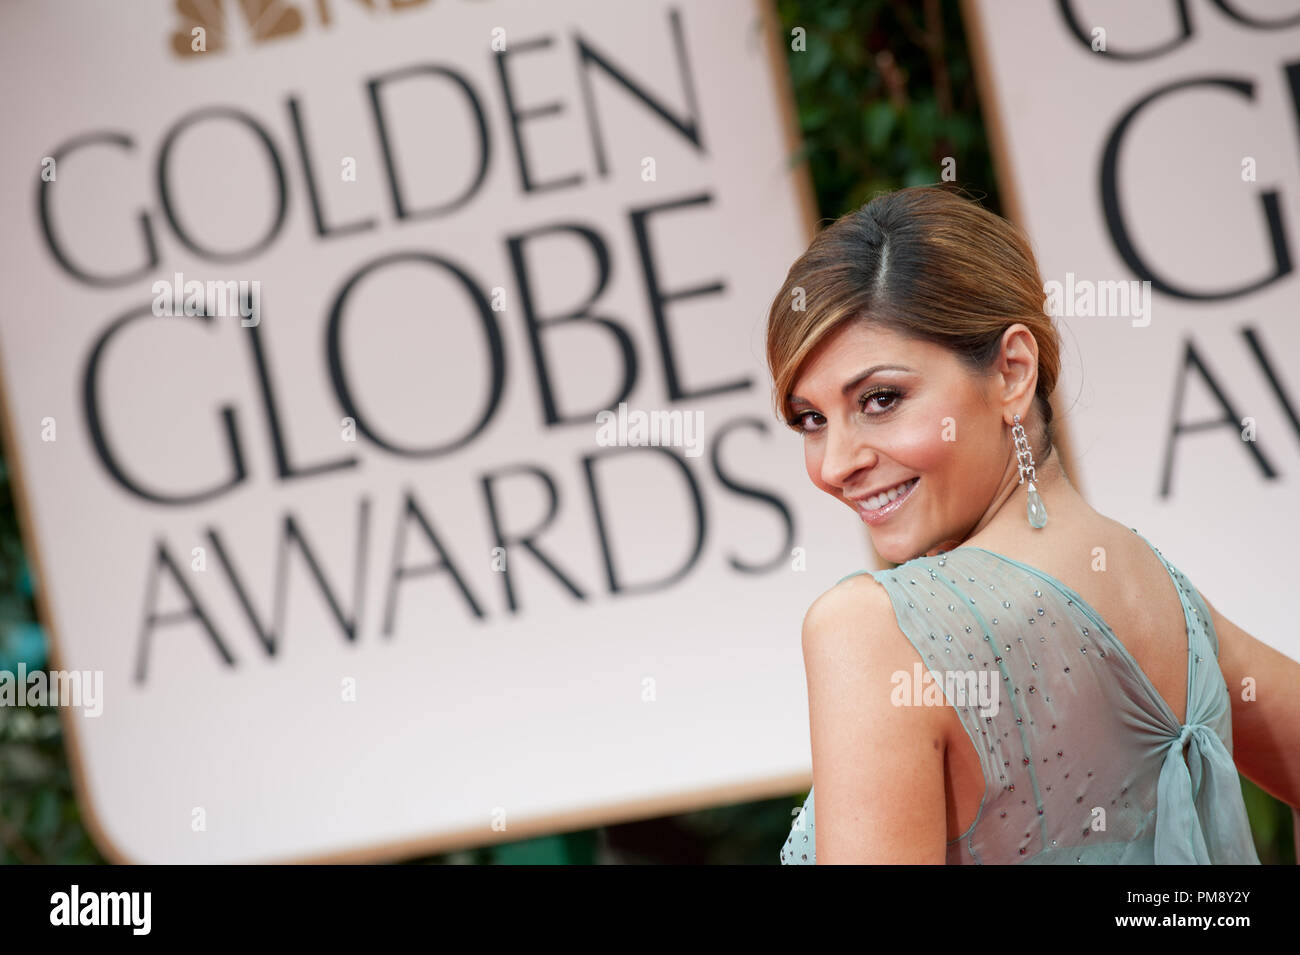 Nominated for BEST PERFORMANCE BY AN ACTRESS IN A TELEVISION SERIES – DRAMA for her role in “Necessary Roughness” (USA Network), actress Callie Thorne attends the 69th Annual Golden Globes Awards at the Beverly Hilton in Beverly Hills, CA on Sunday, January 15, 2012. Stock Photo